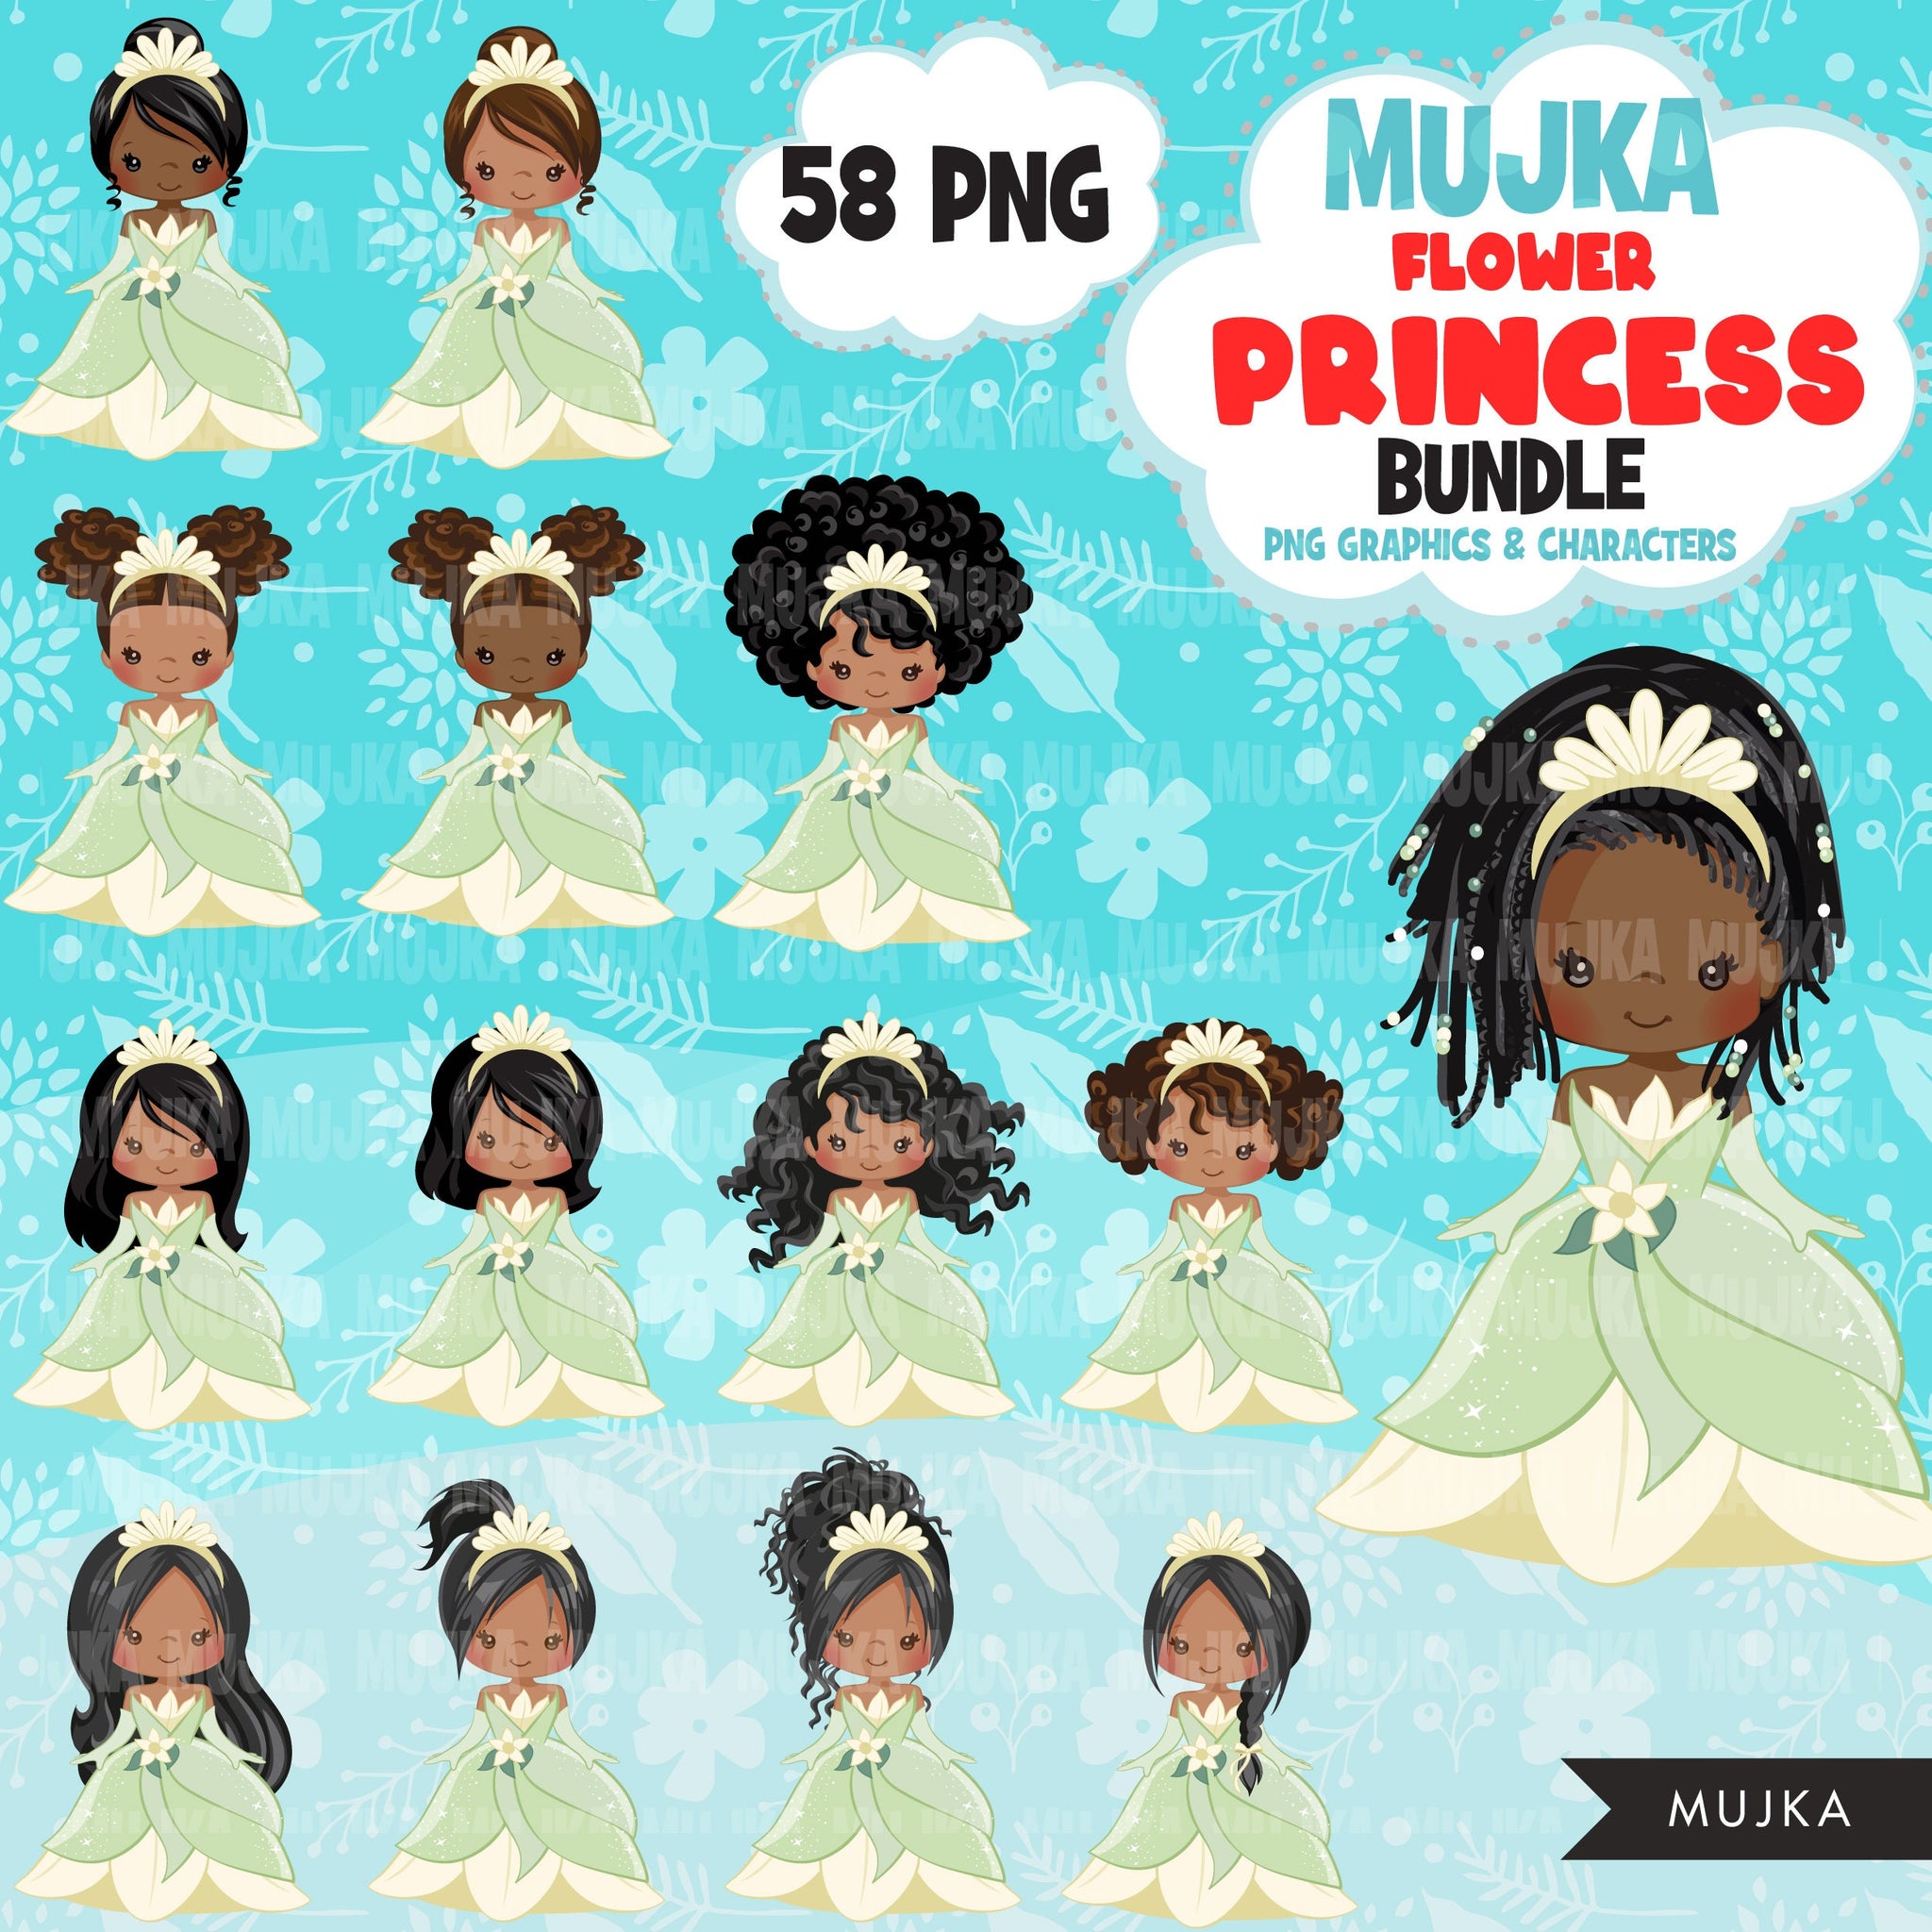 Baby Tiana Clipart PNG Instant Digital Download Tiana 